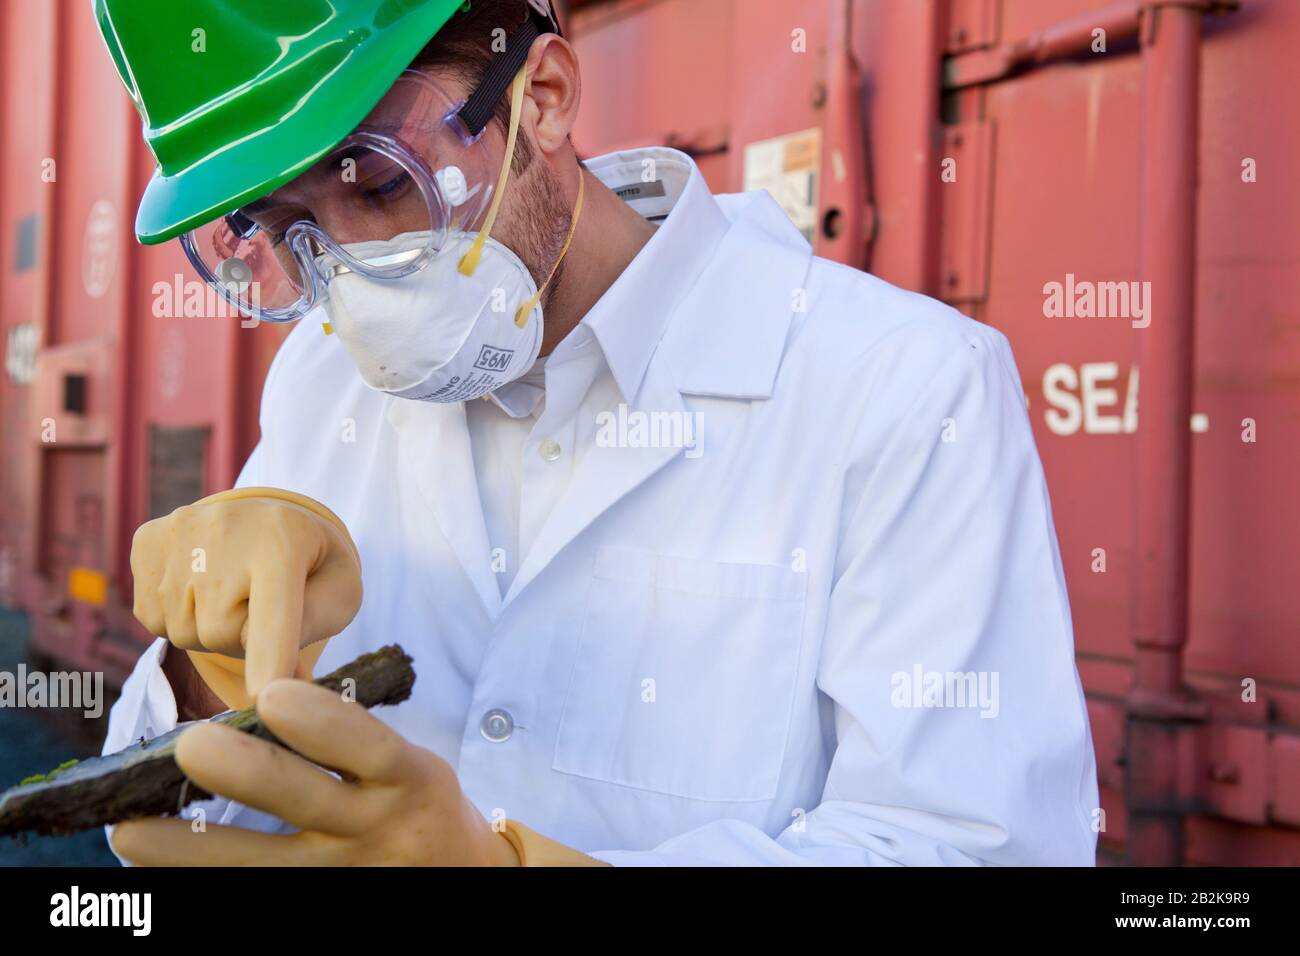 Safety inspector holding biological material Stock Photo